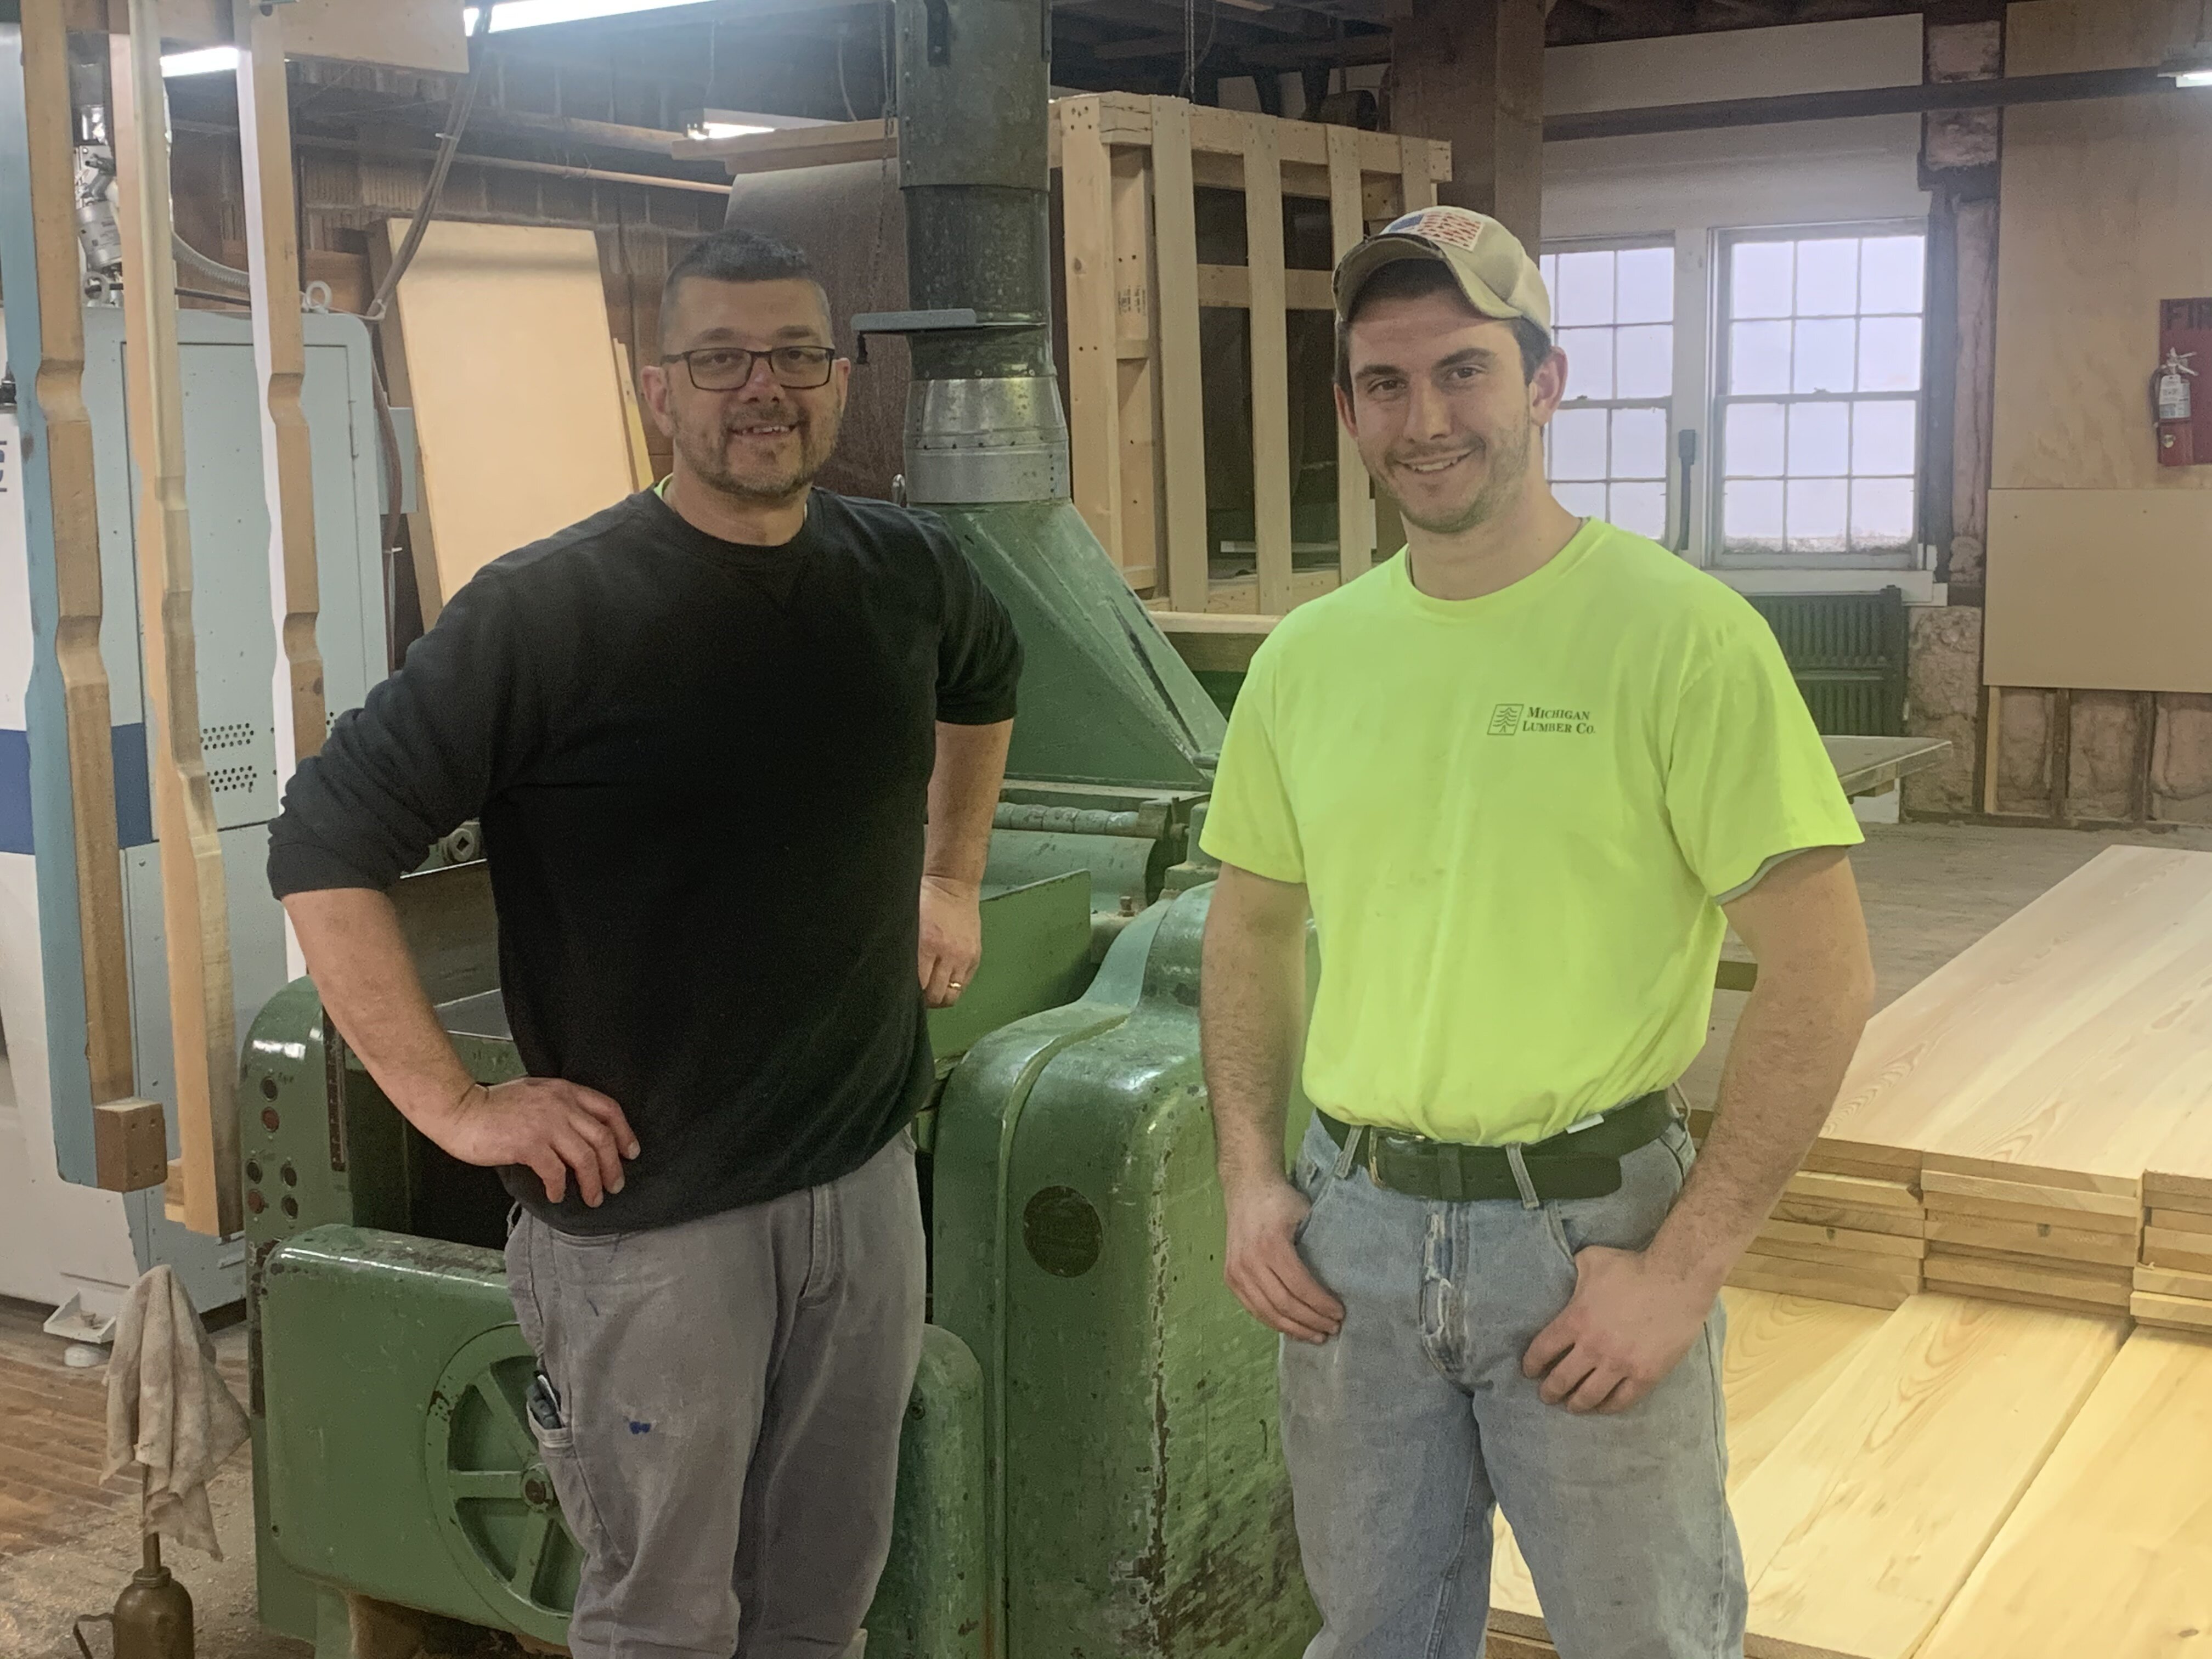 Harvey and Chris, one of several father-son duos working at Michigan Lumber, standing in front of a 60+ year old workhorse planer.